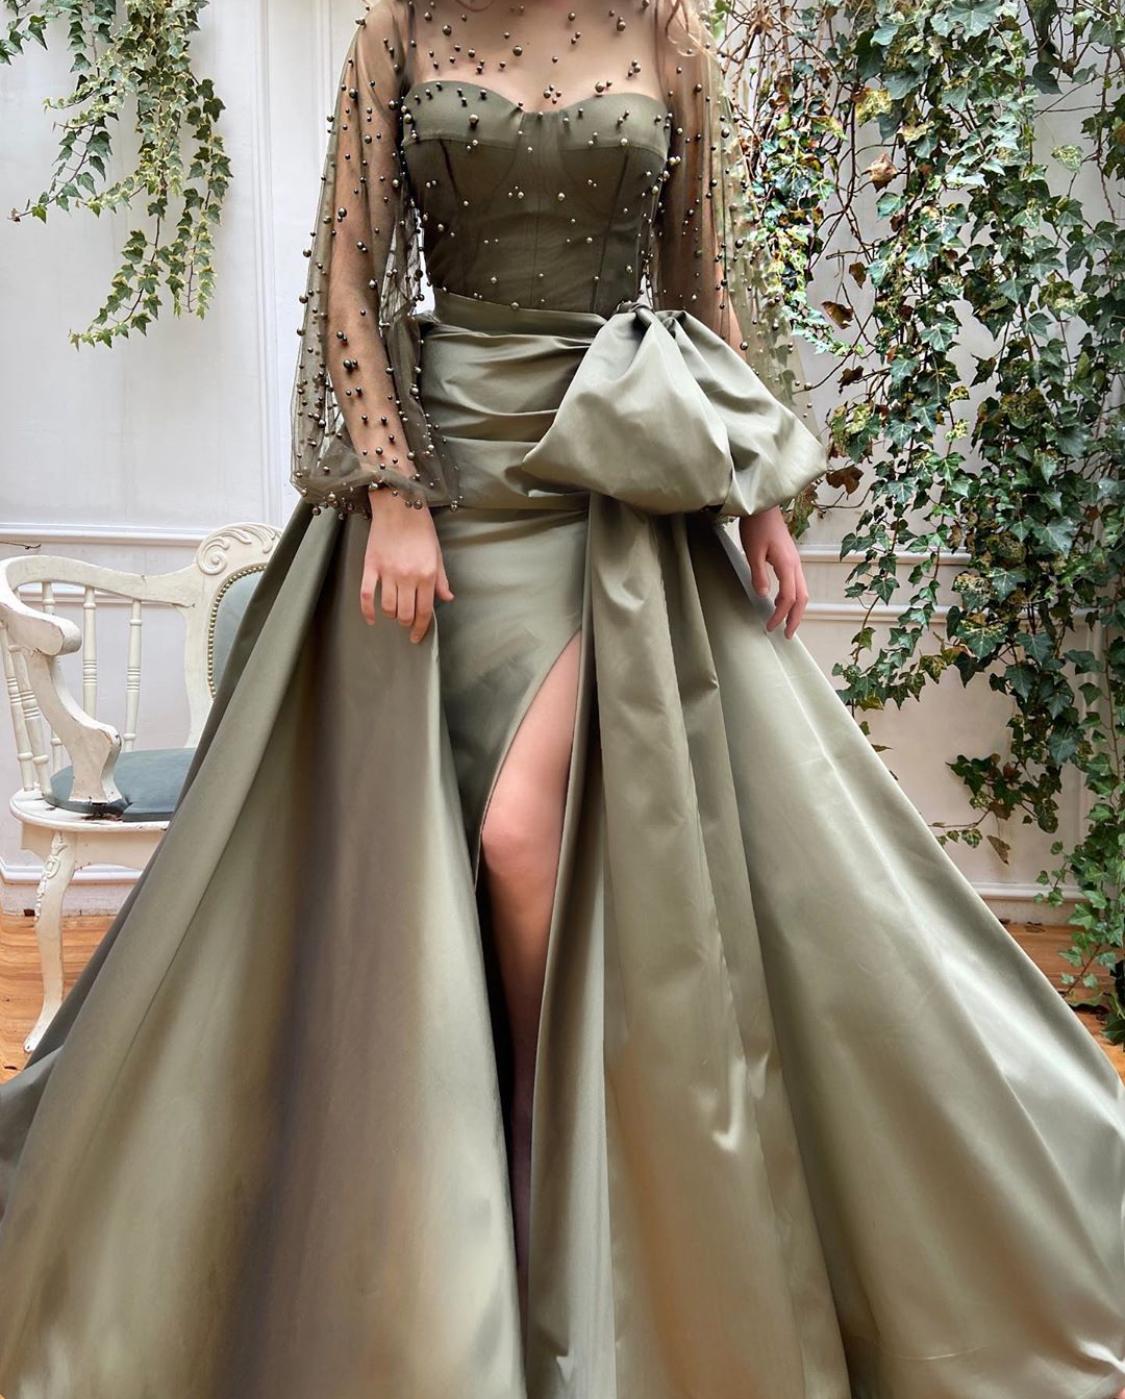 Green overskirt dress with long sleeves and beading